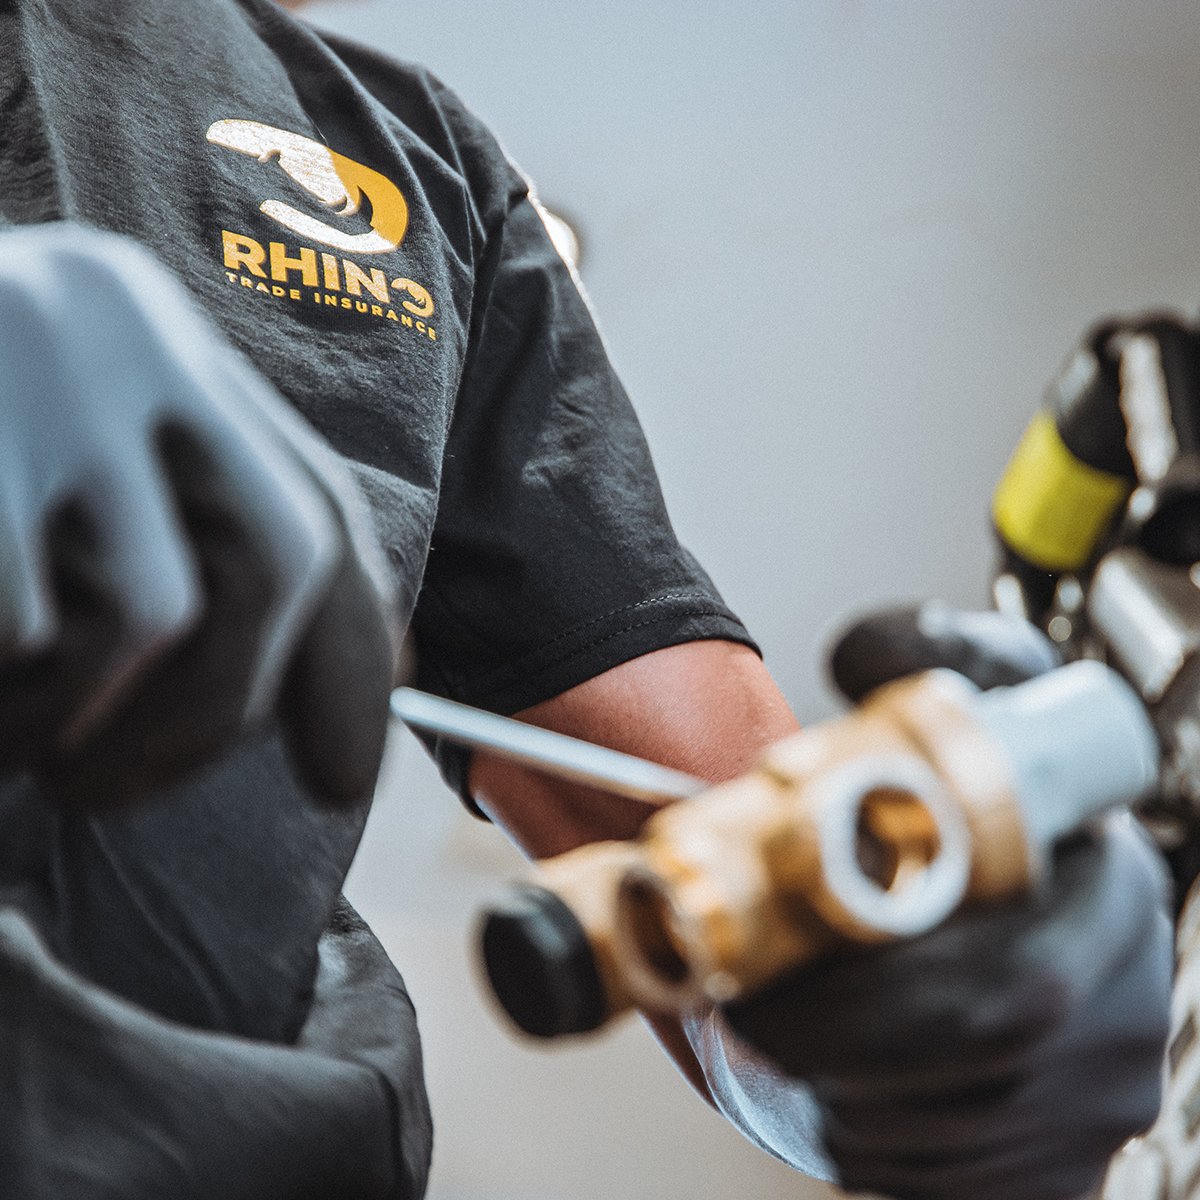 Plumbing game strong, and so is the fashion game. 💧🔧 @cputilitysolutions Let's see you rocking the Rhino swag on-site 🦏👀 #plumbing #tradeinsurance #tradeswear #onsite